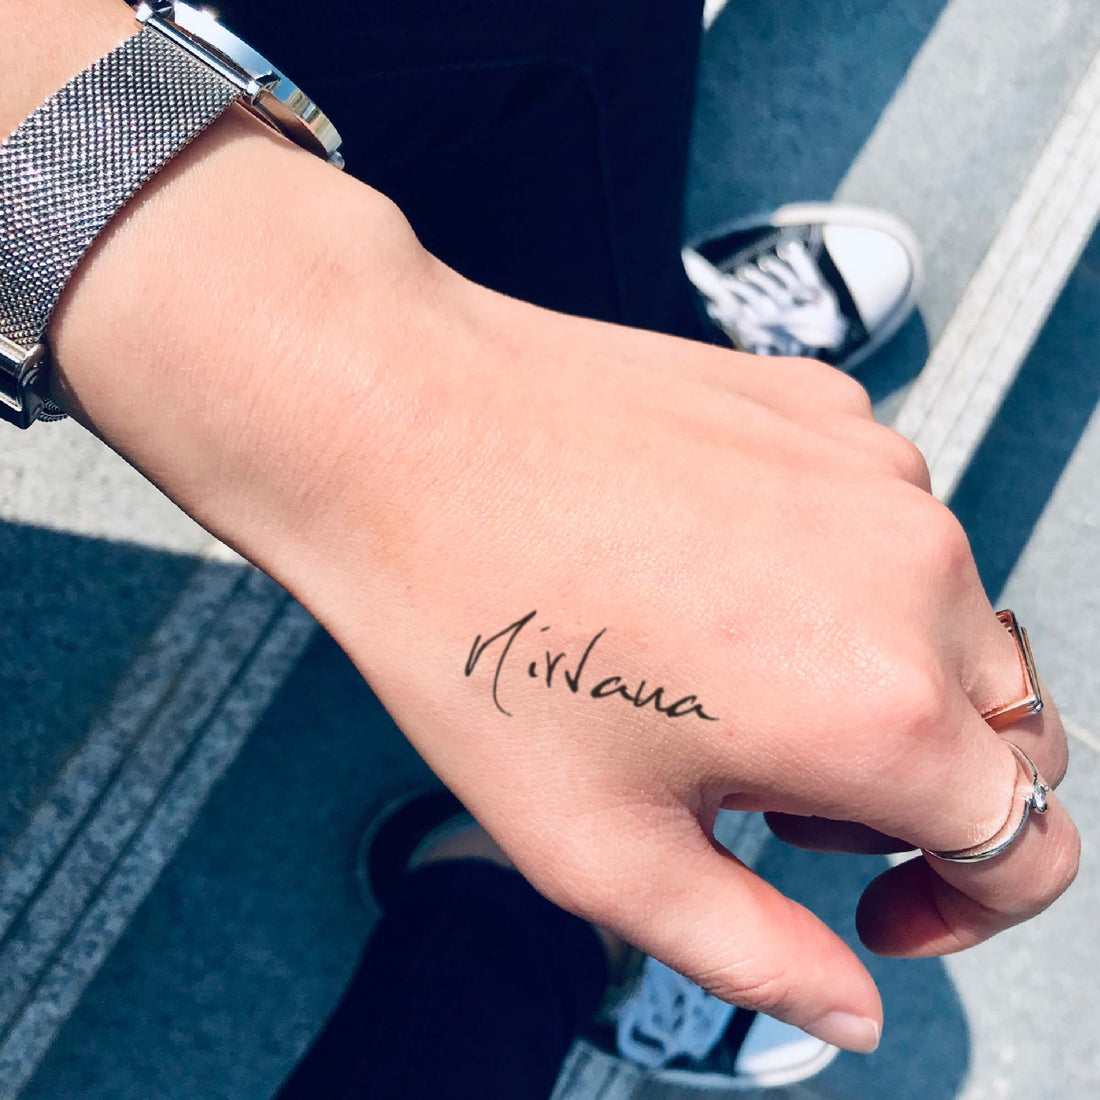 Nirvana custom temporary tattoo sticker design idea inspiration meanings removal arm wrist hand words font name signature calligraphy lyrics tour concert outfits merch accessory gift souvenir costumes wear dress up code